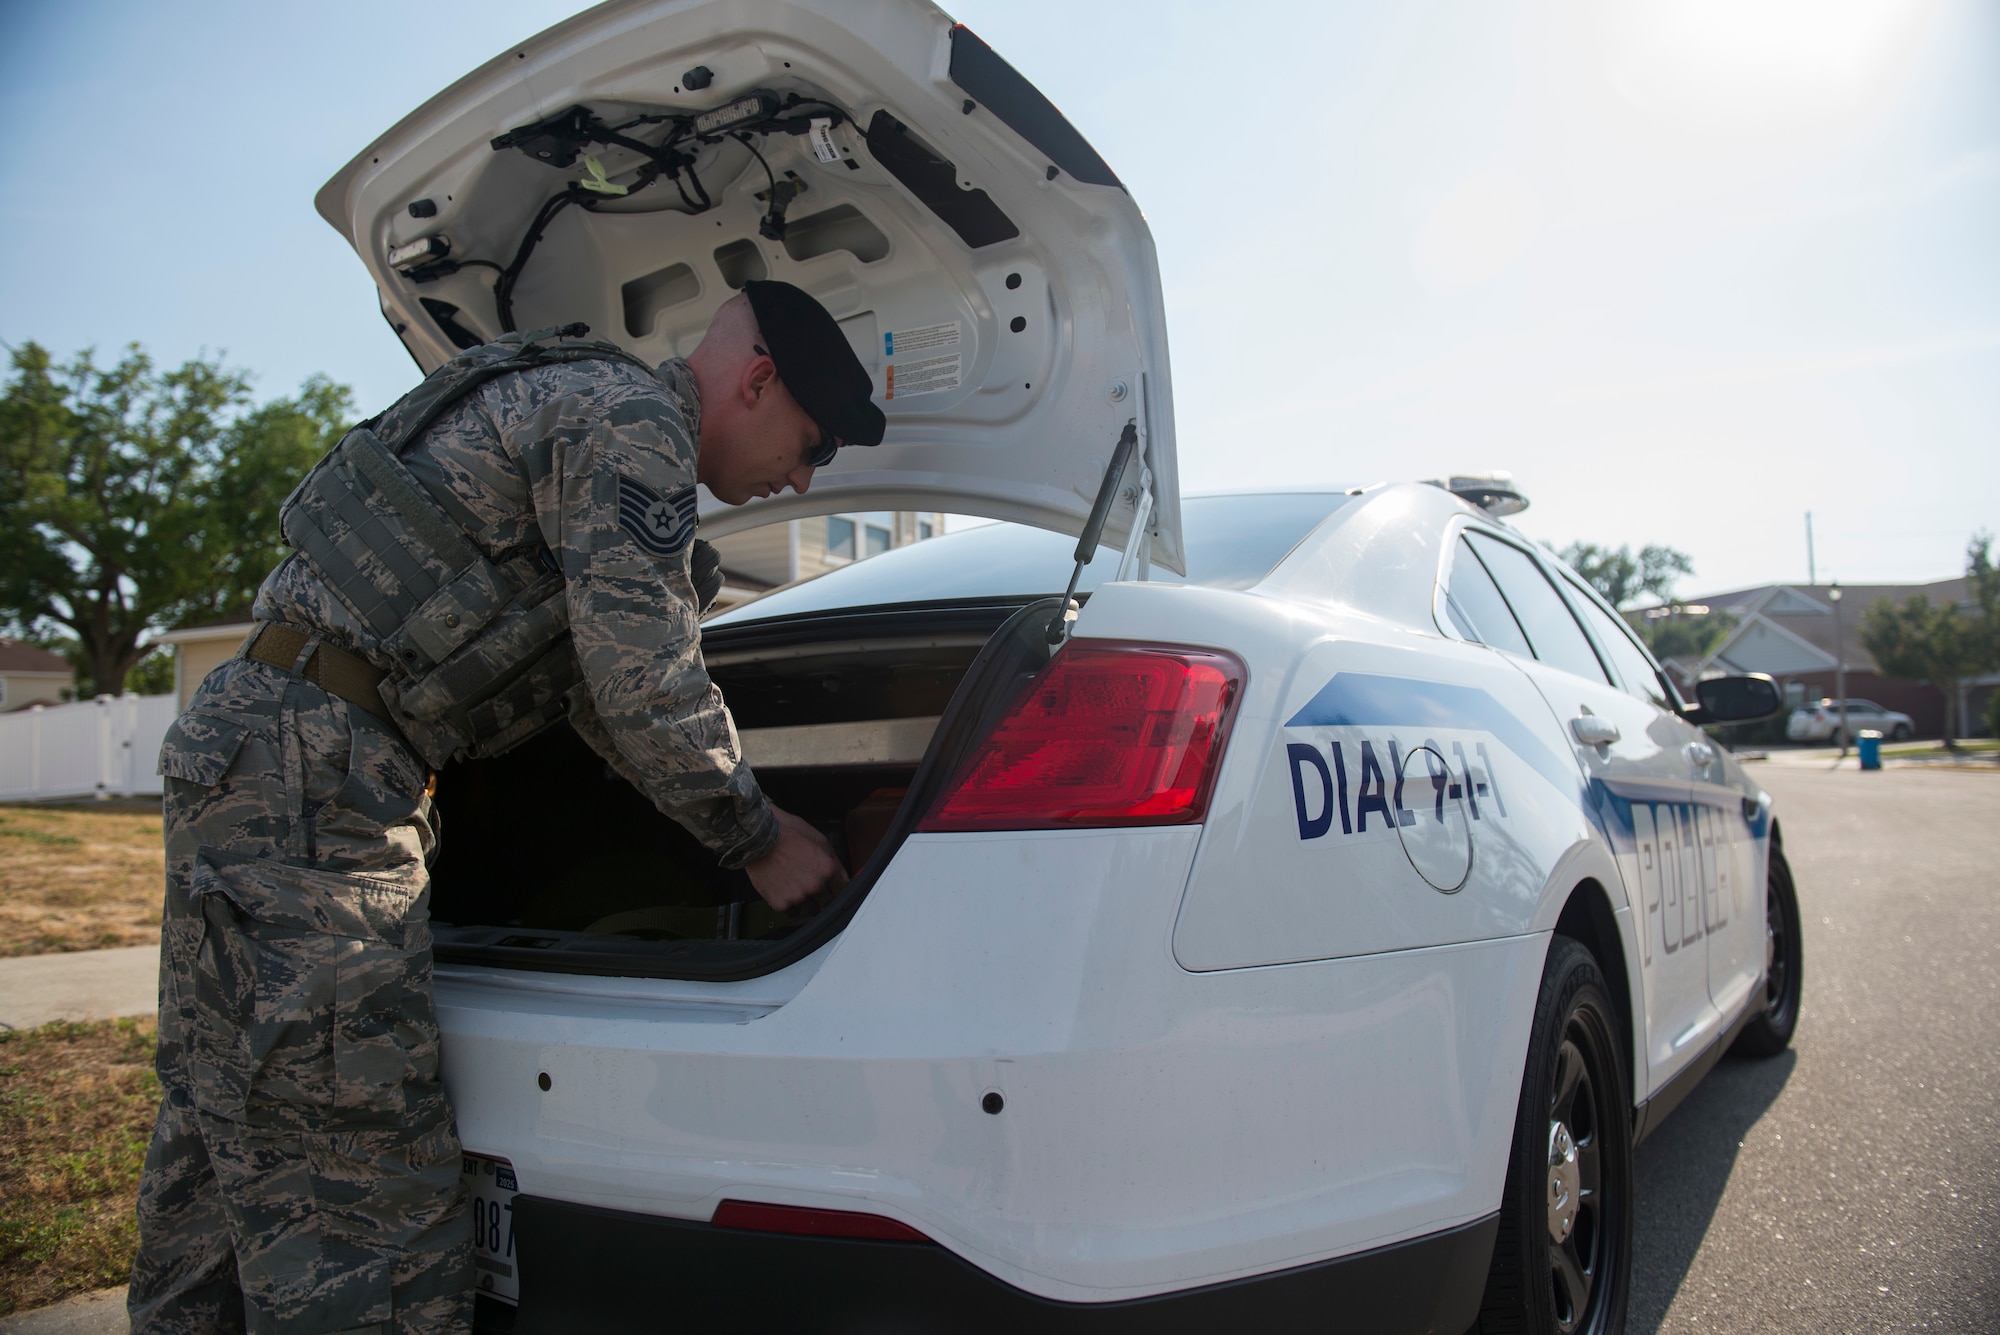 Tech. Sgt. Jarrod Kinard, 81st Security Forces Squadron flight chief, retrieves his firearm from the trunk of his patrol car during a ride-along at Keesler Air Force Base, Miss., May 17, 2018. The ride-along program is part of the 81st SFS community involvement initiative where anyone, age 15 and up and with base access, can see what it's like to be a defender. If you are interested in the ride-along program, please contact Tech. Sgt. Matthew Oleson at 228-376-6601. (U.S. Air Force photo by Senior Airman Travis Beihl)